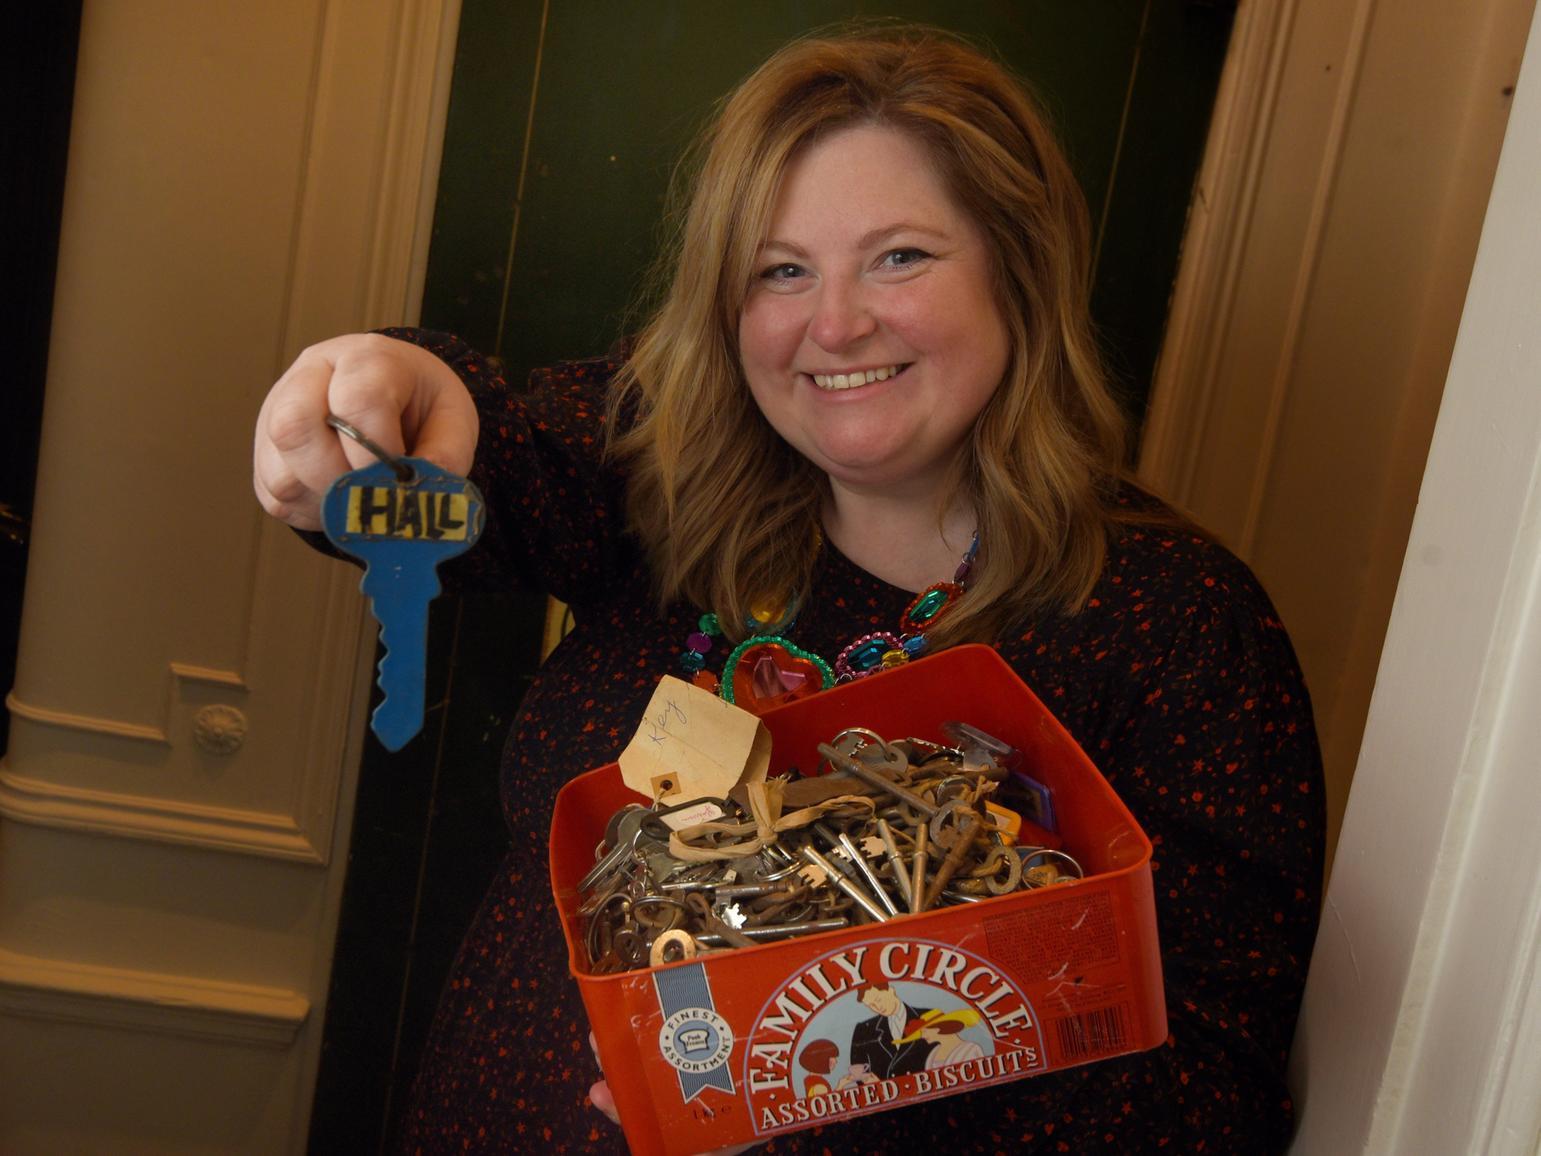 Inside The Convent, Gemma shows off some keys she found under the floor